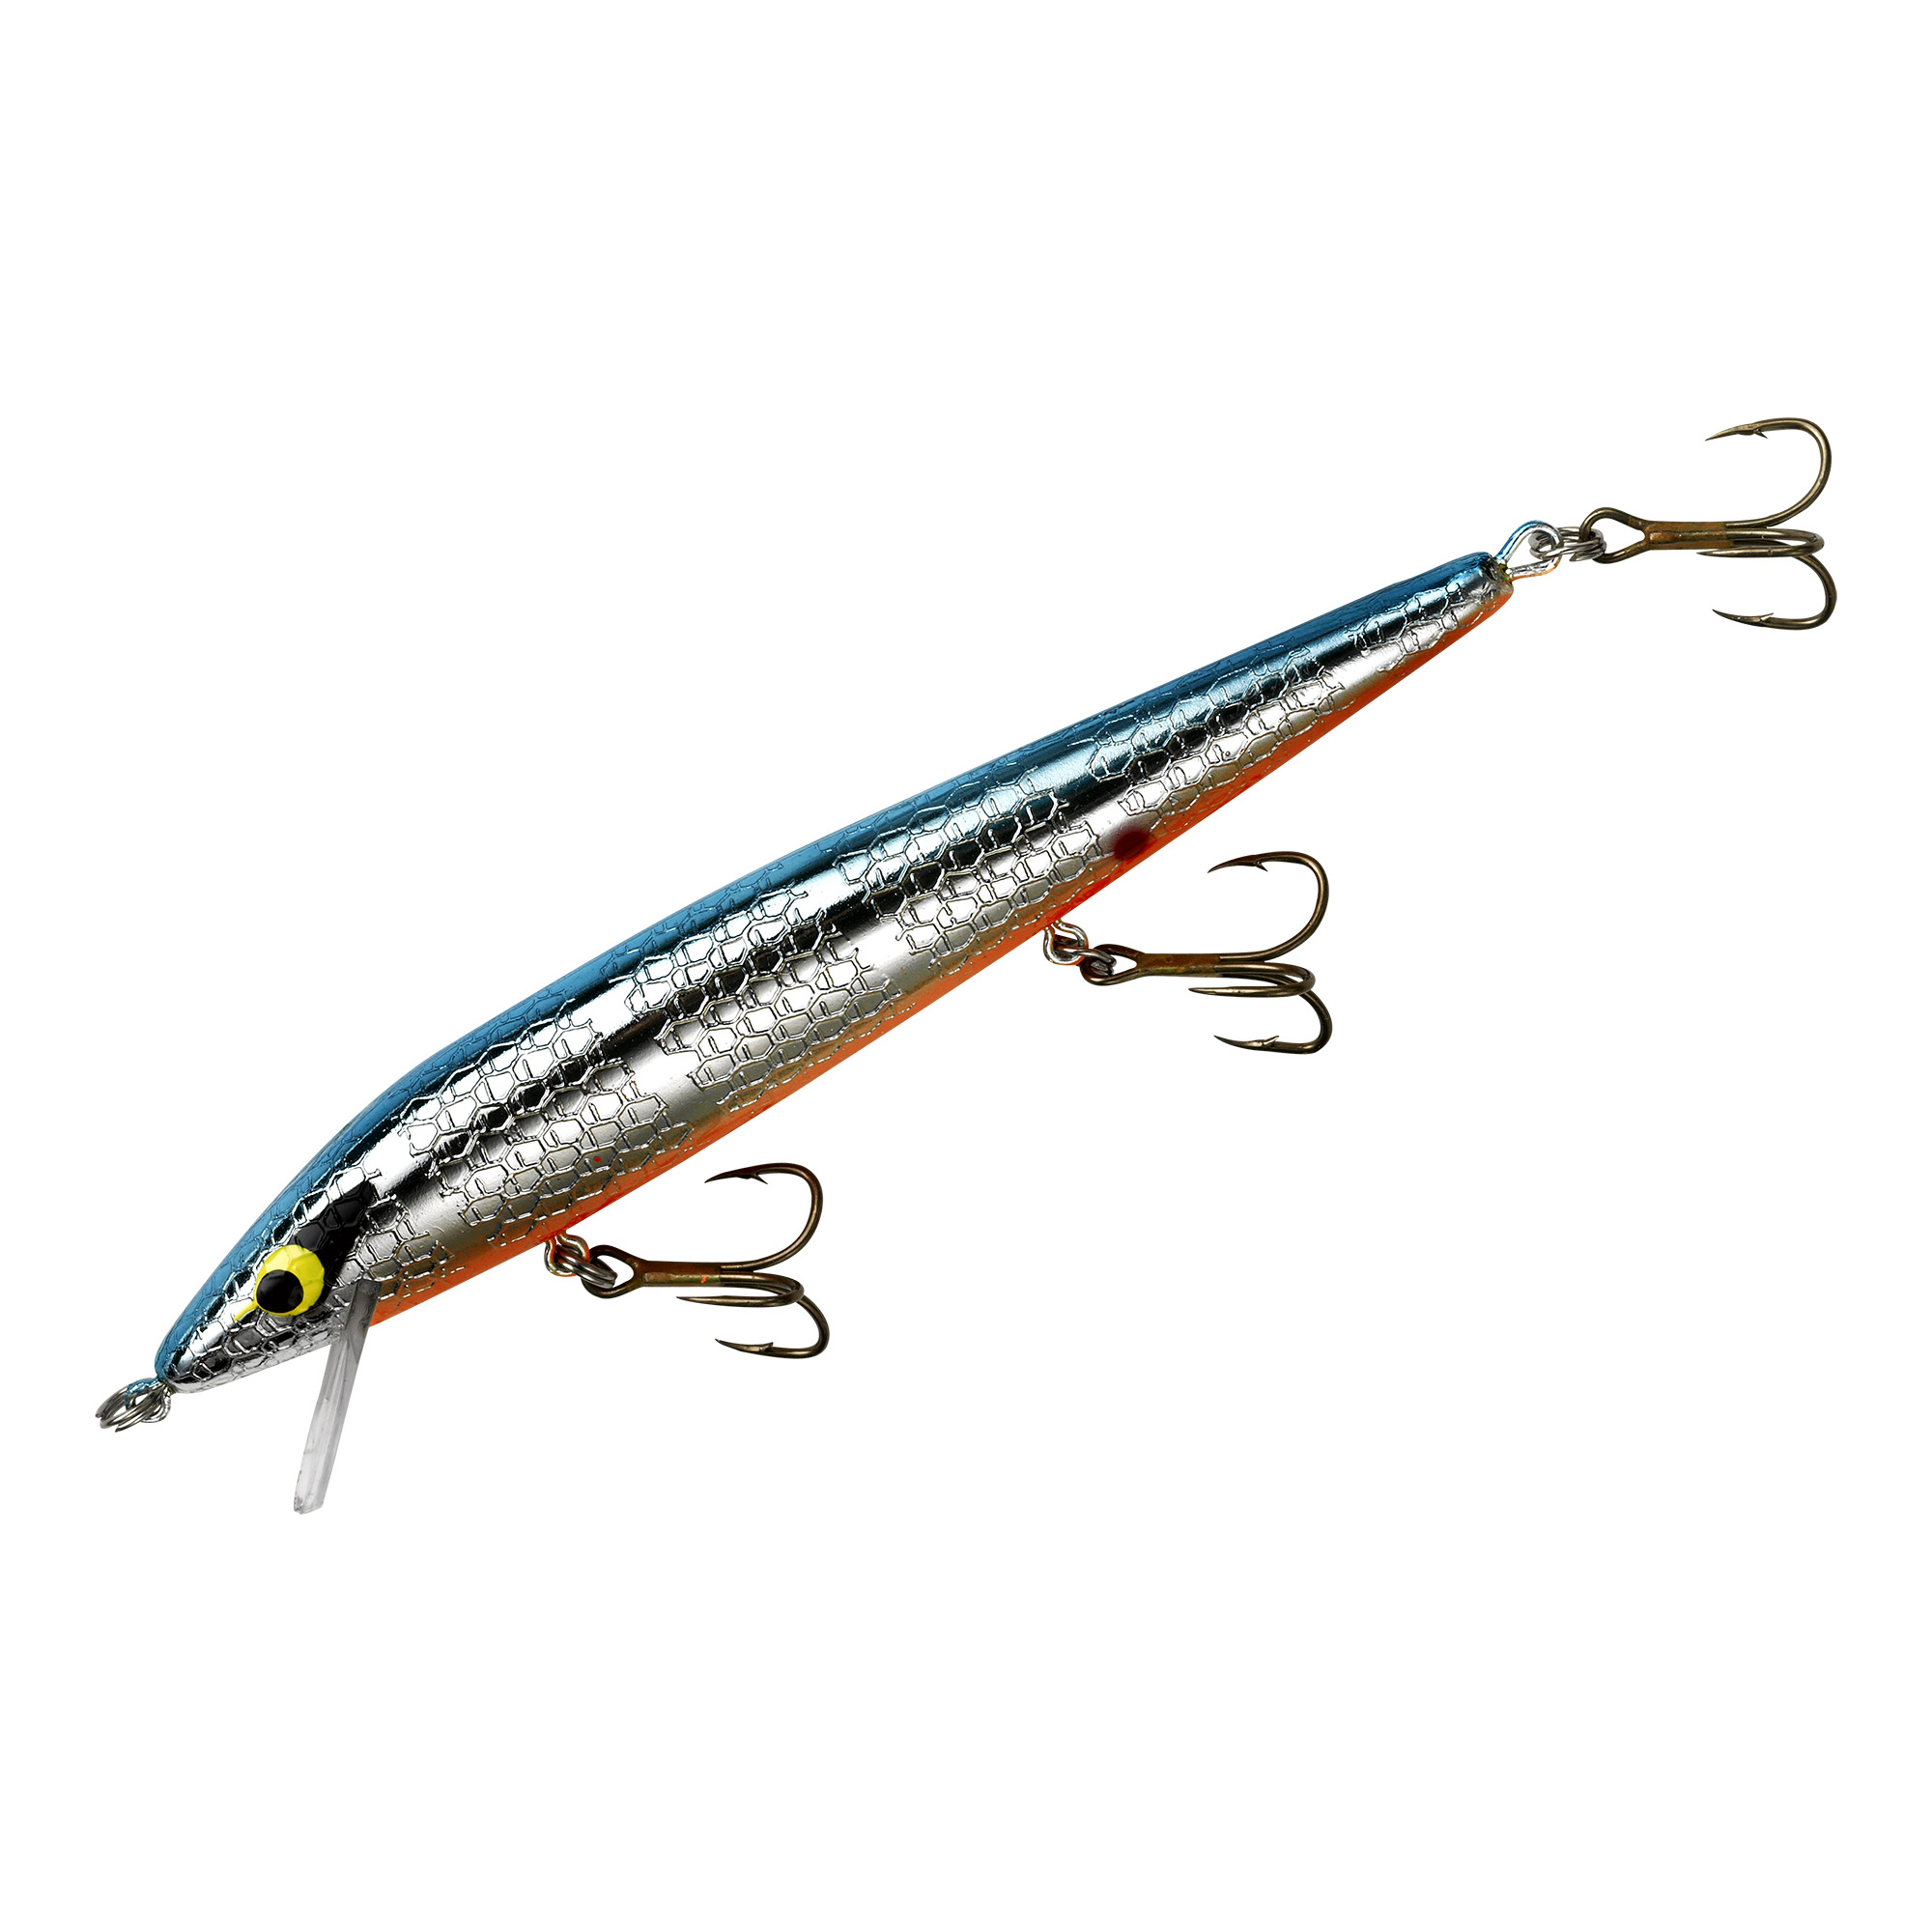 Smithwick Rattlin' Floating Rogue Clown ARB1235 for sale online 